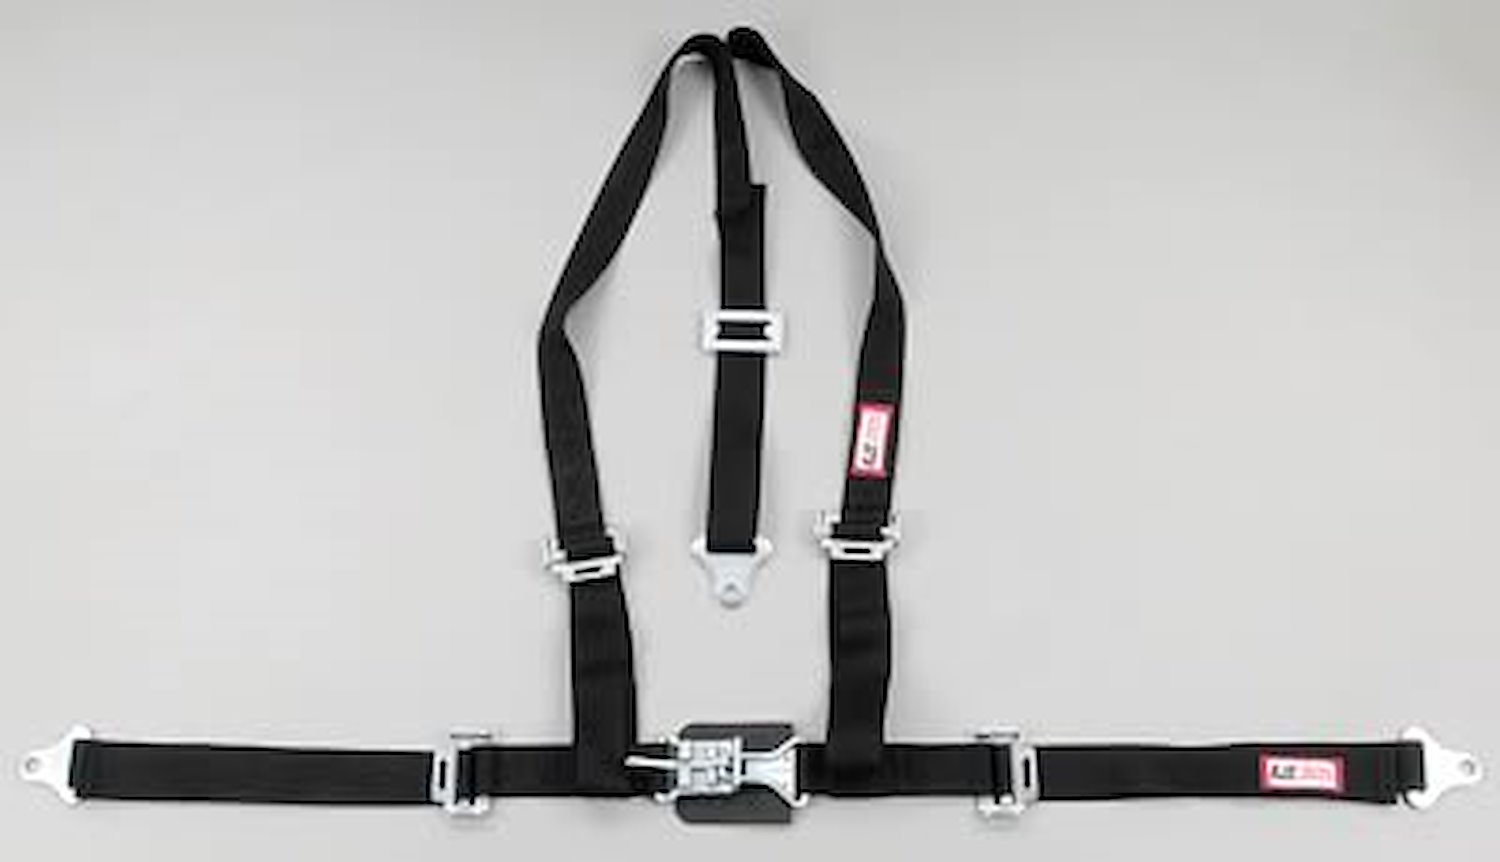 NON-SFI L&L HARNESS 3 PULL UP Lap Belt w/adjuster 2 S.H. V ROLL BAR Mount ALL WRAP ENDS RED